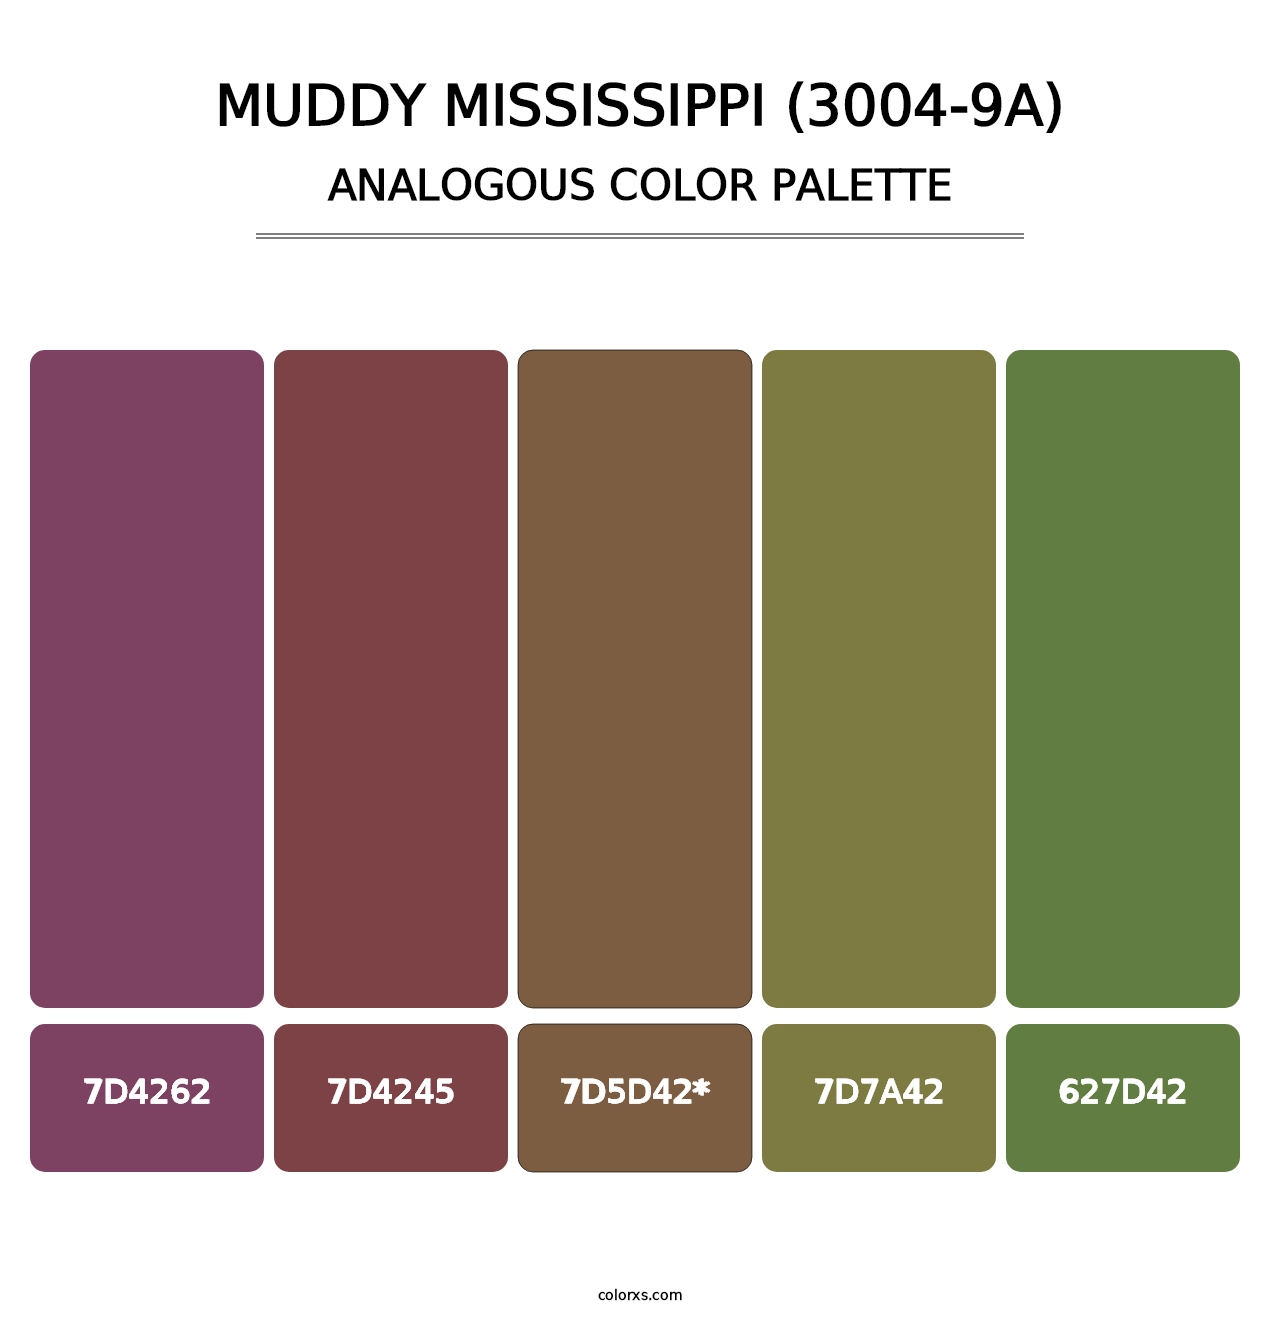 Muddy Mississippi (3004-9A) - Analogous Color Palette